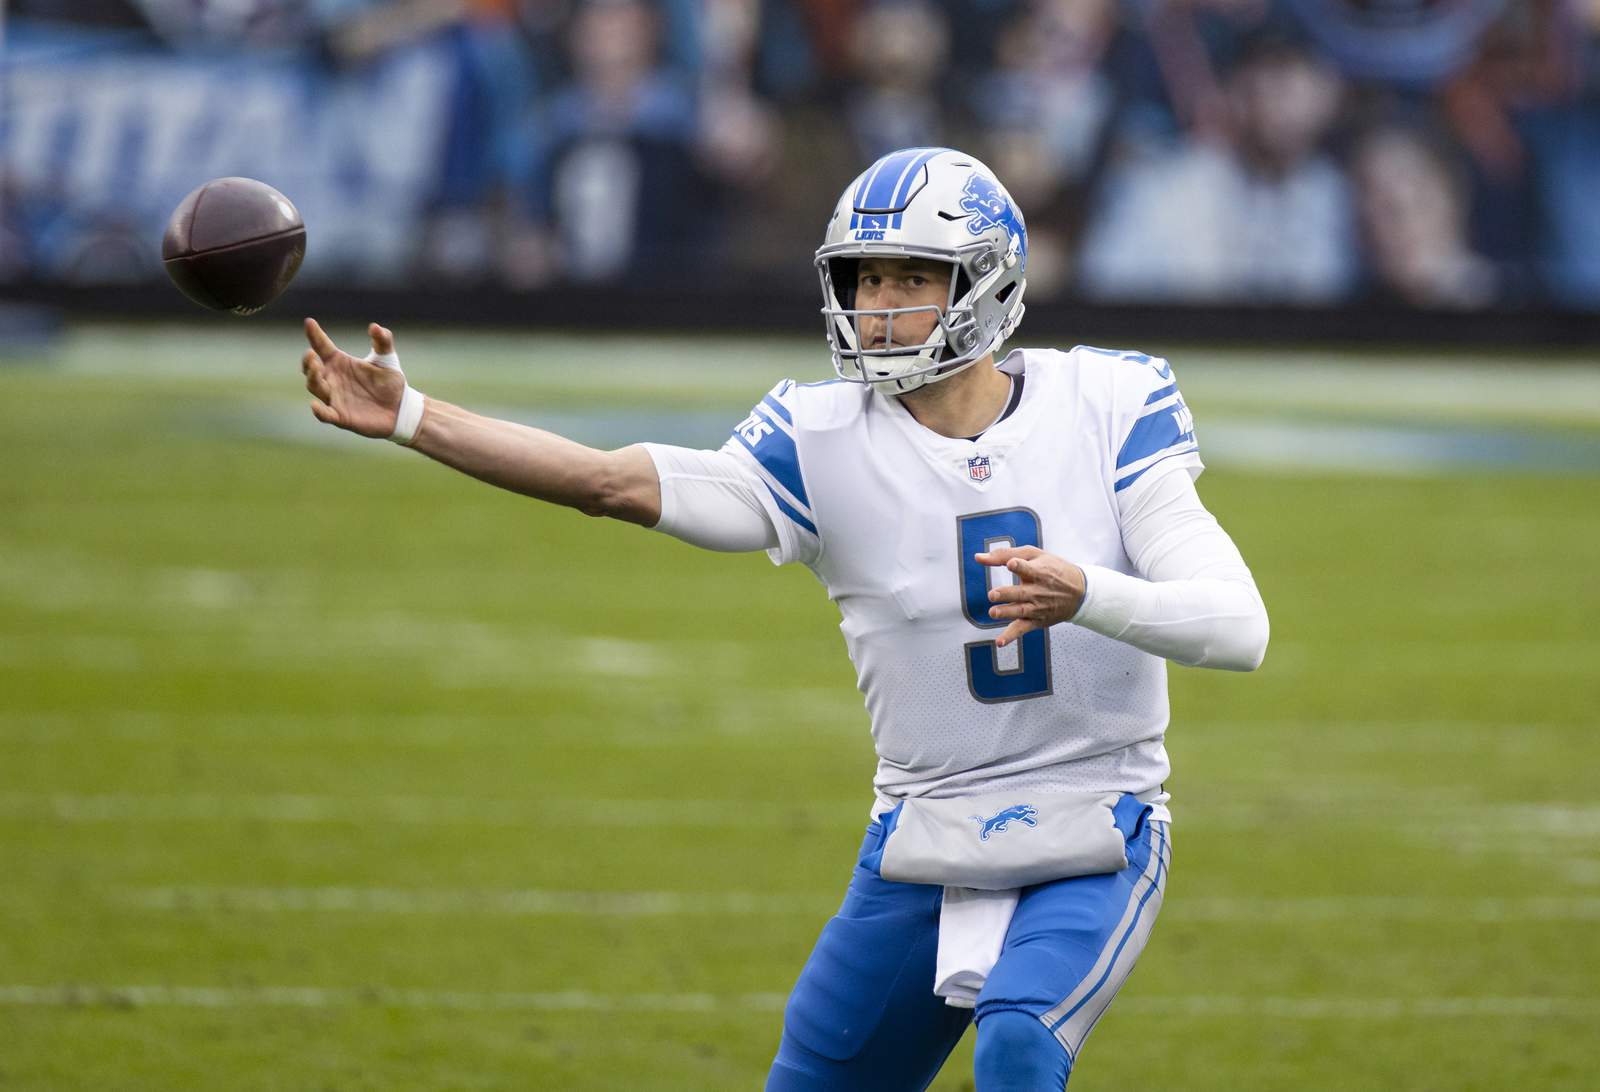 NFC North-leading Lions rally from 12-point deficit late to beat Bears